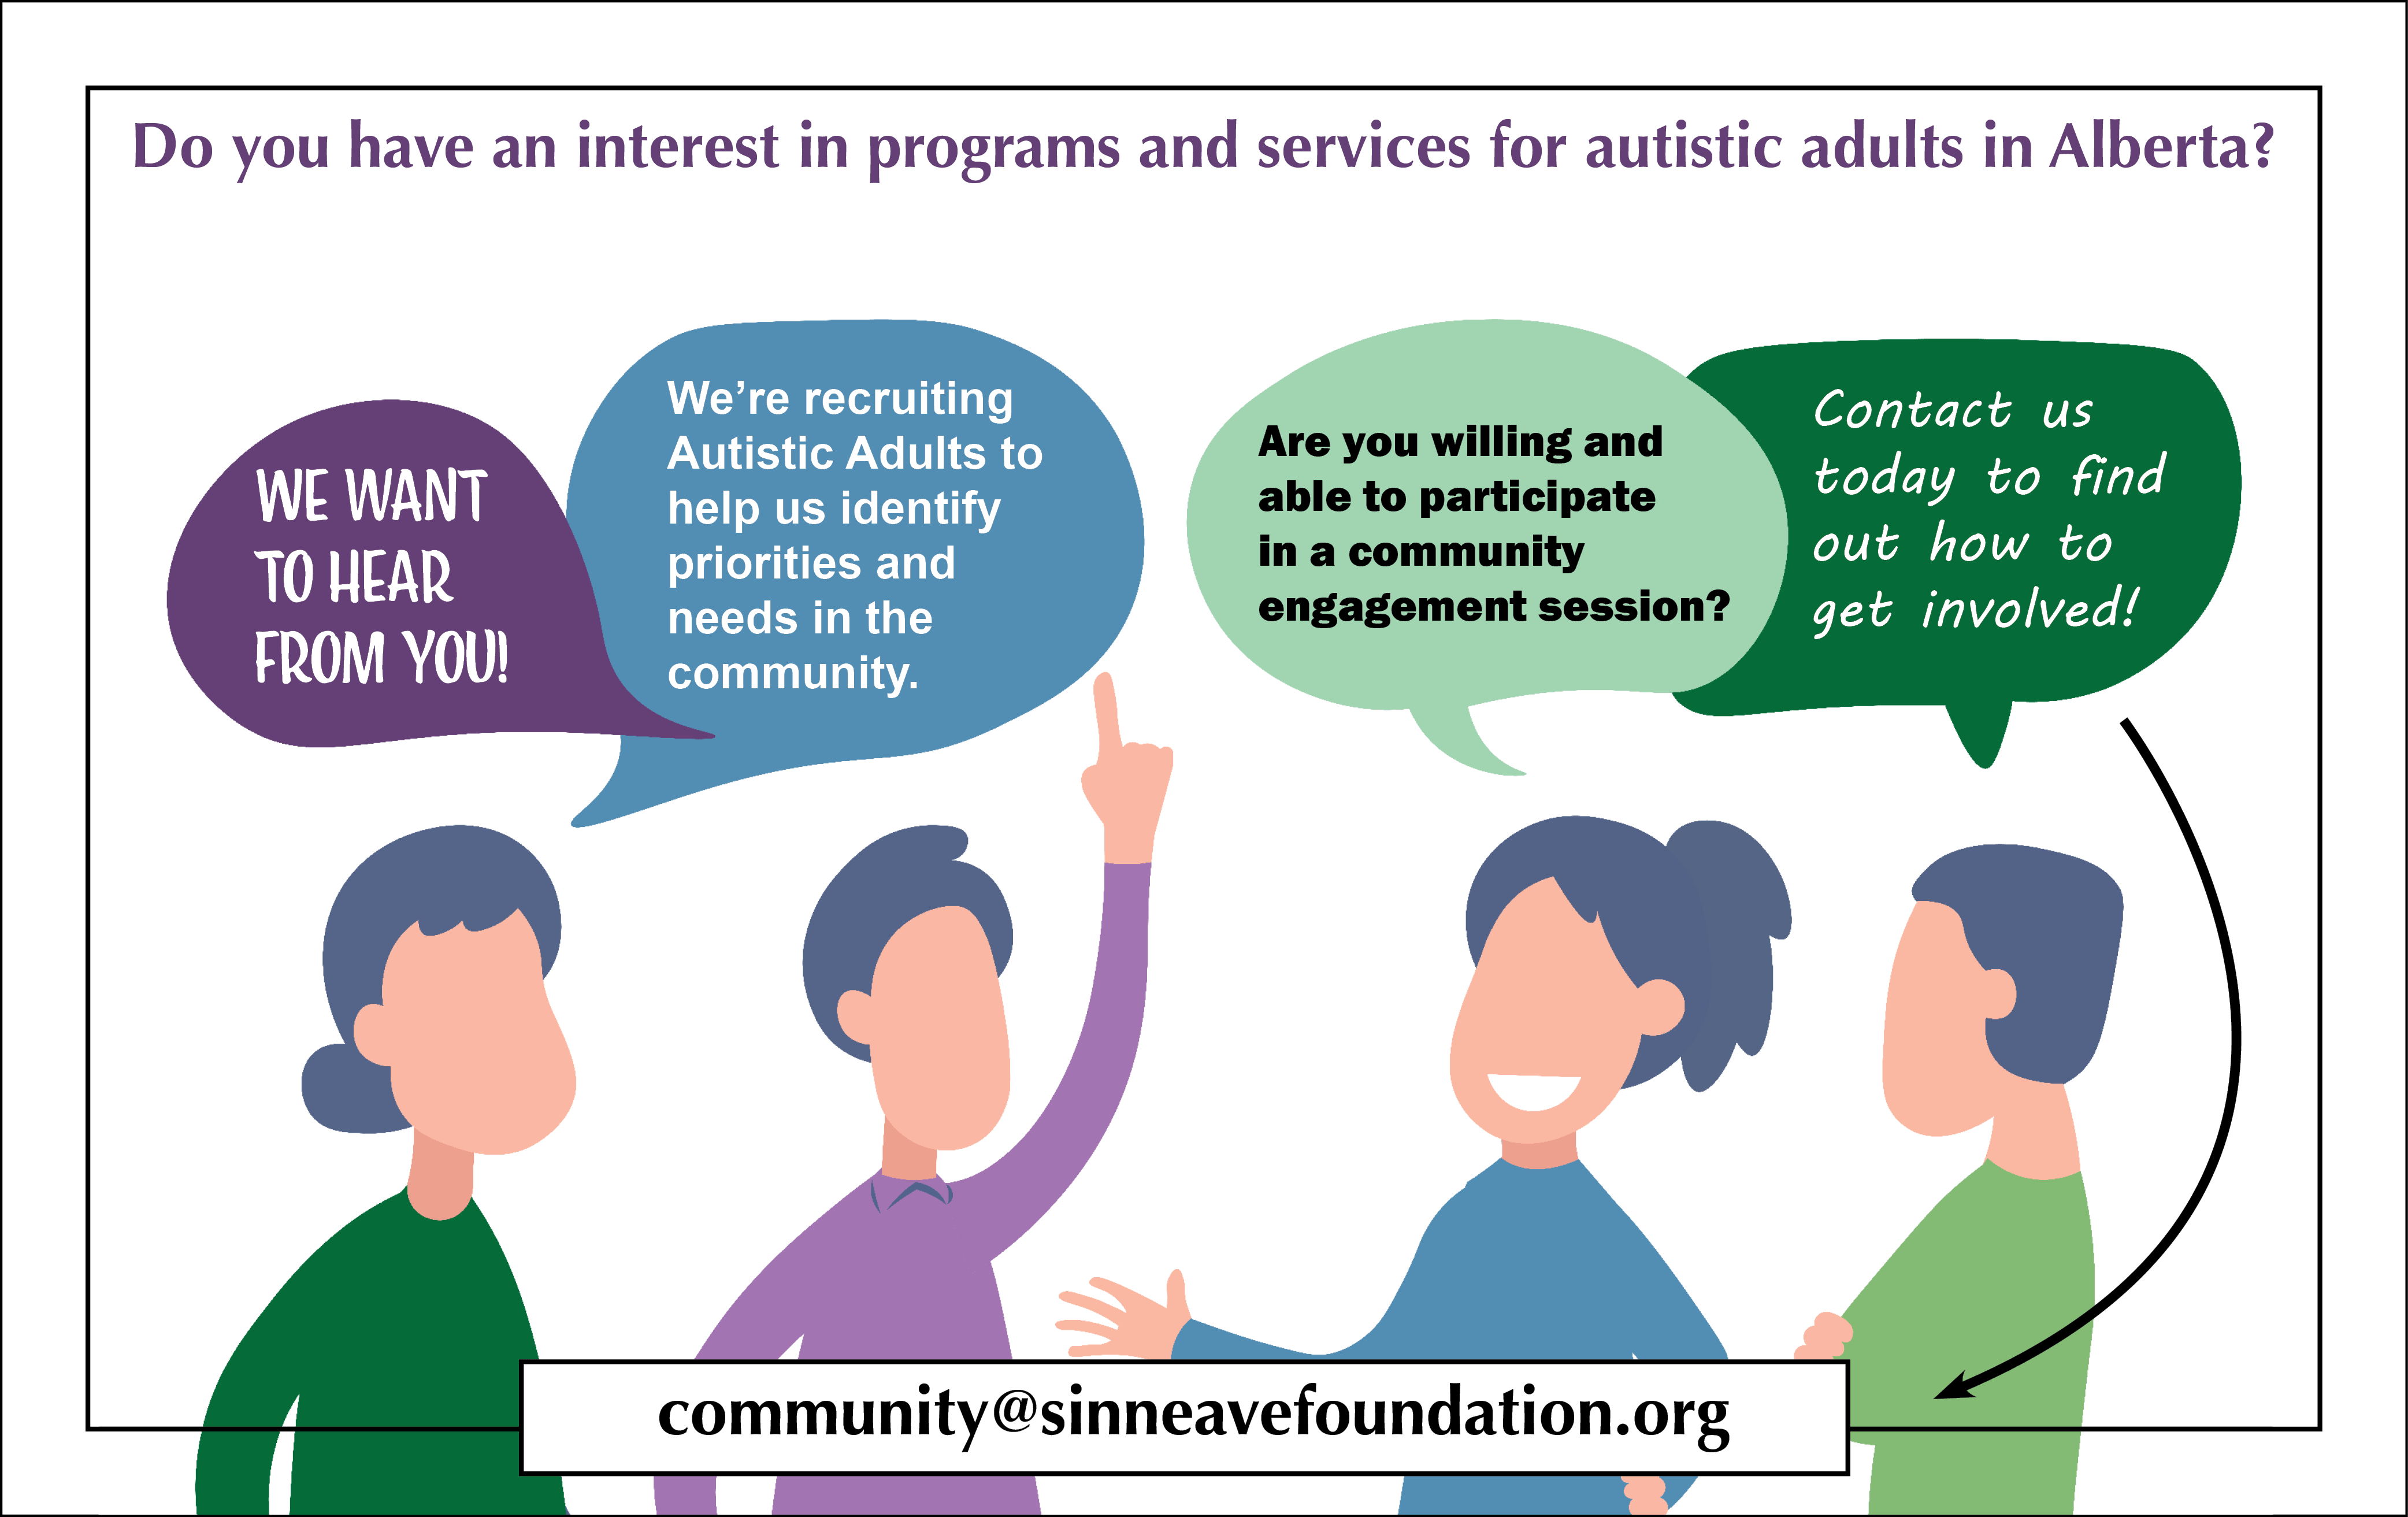 Feedback, autistic adults, community engagement, input, programs, services